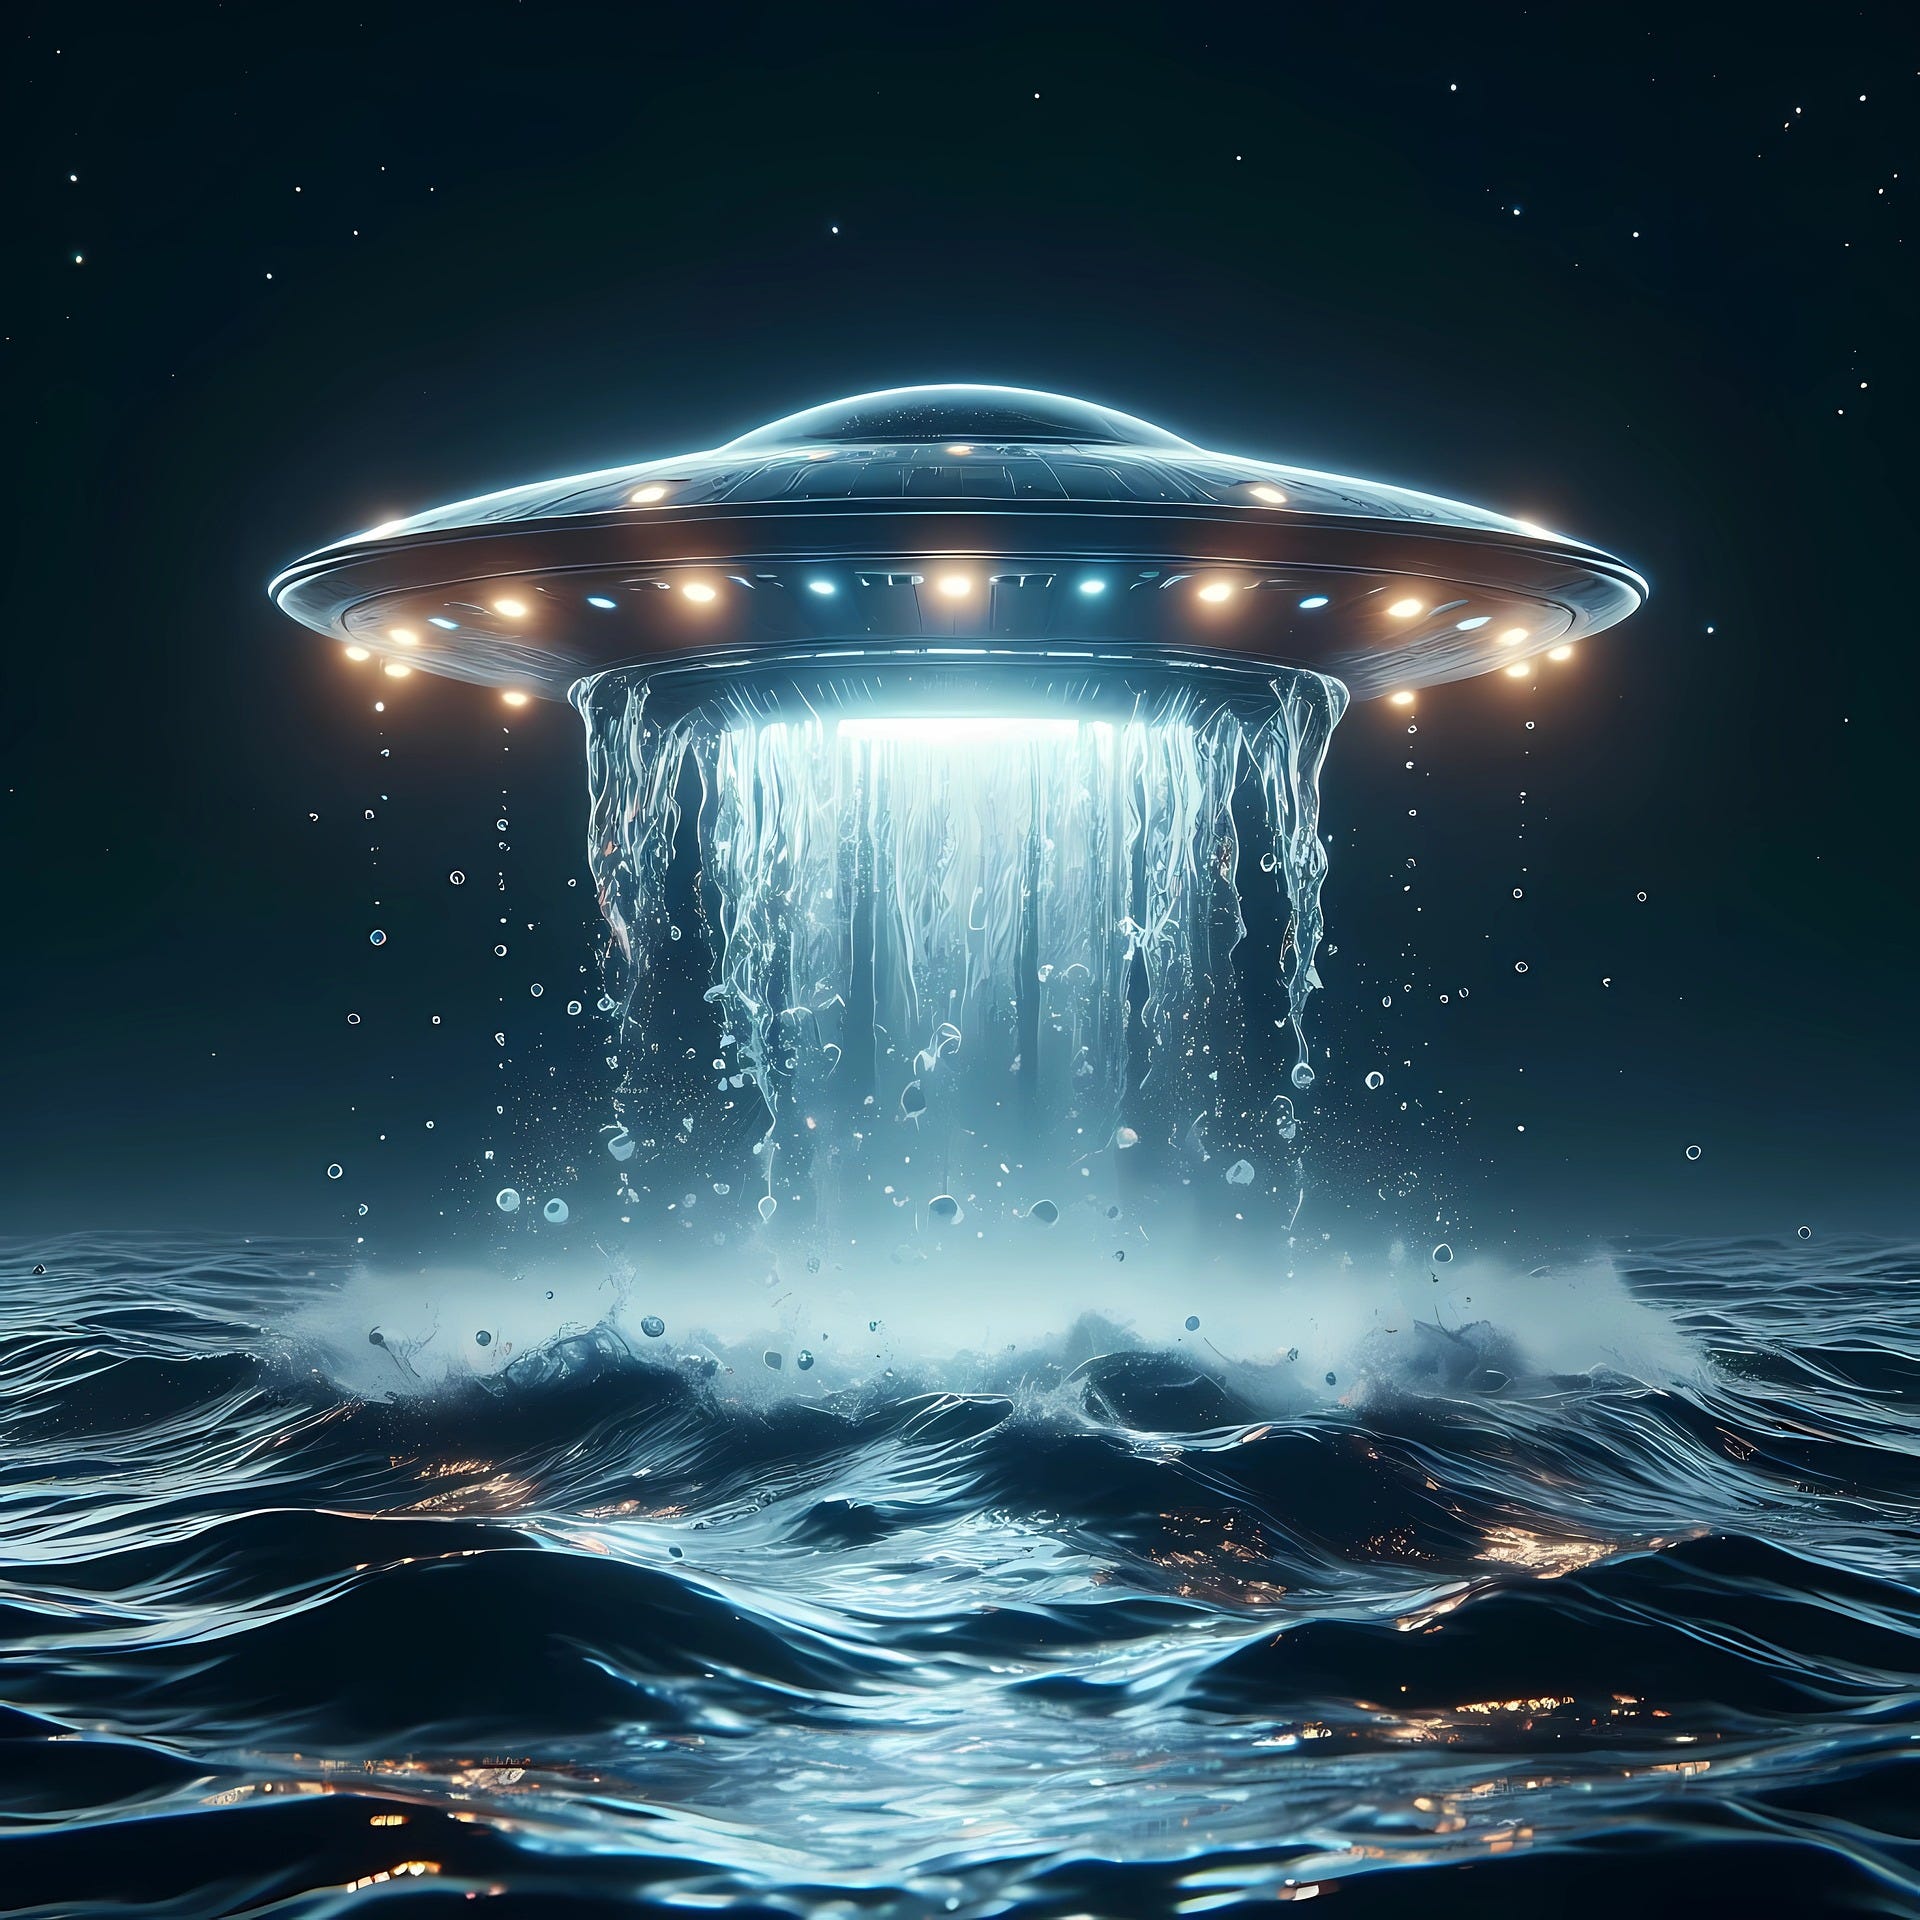 Arguments about the Extraterrestrial Origin of Flying Saucers